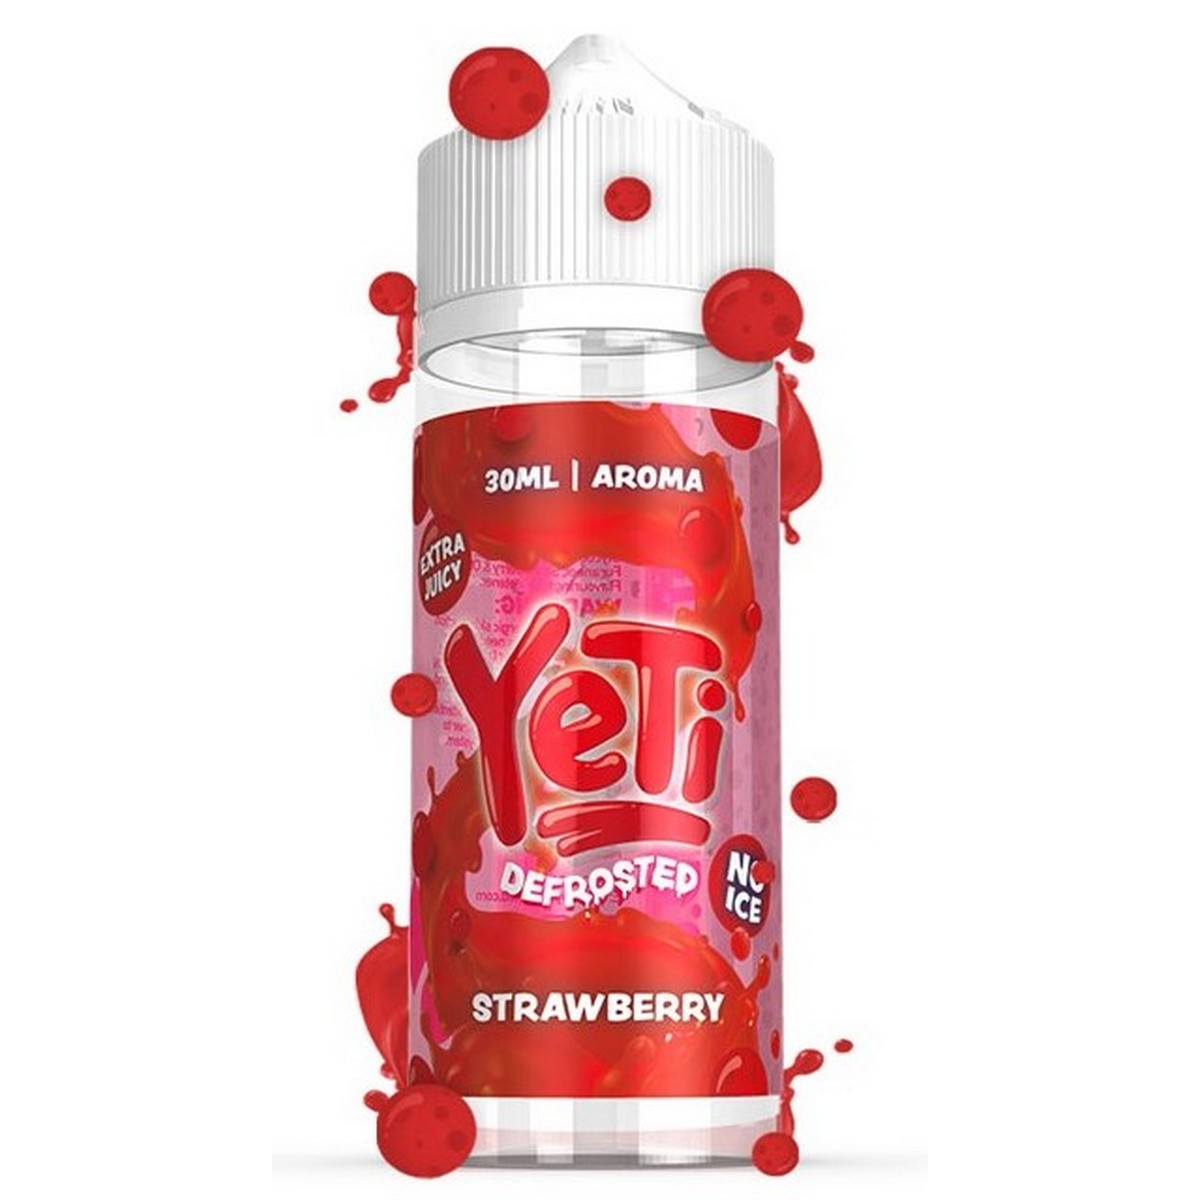 Yeti Defrosted Flavour Shot Strawberry 30ml/120ml